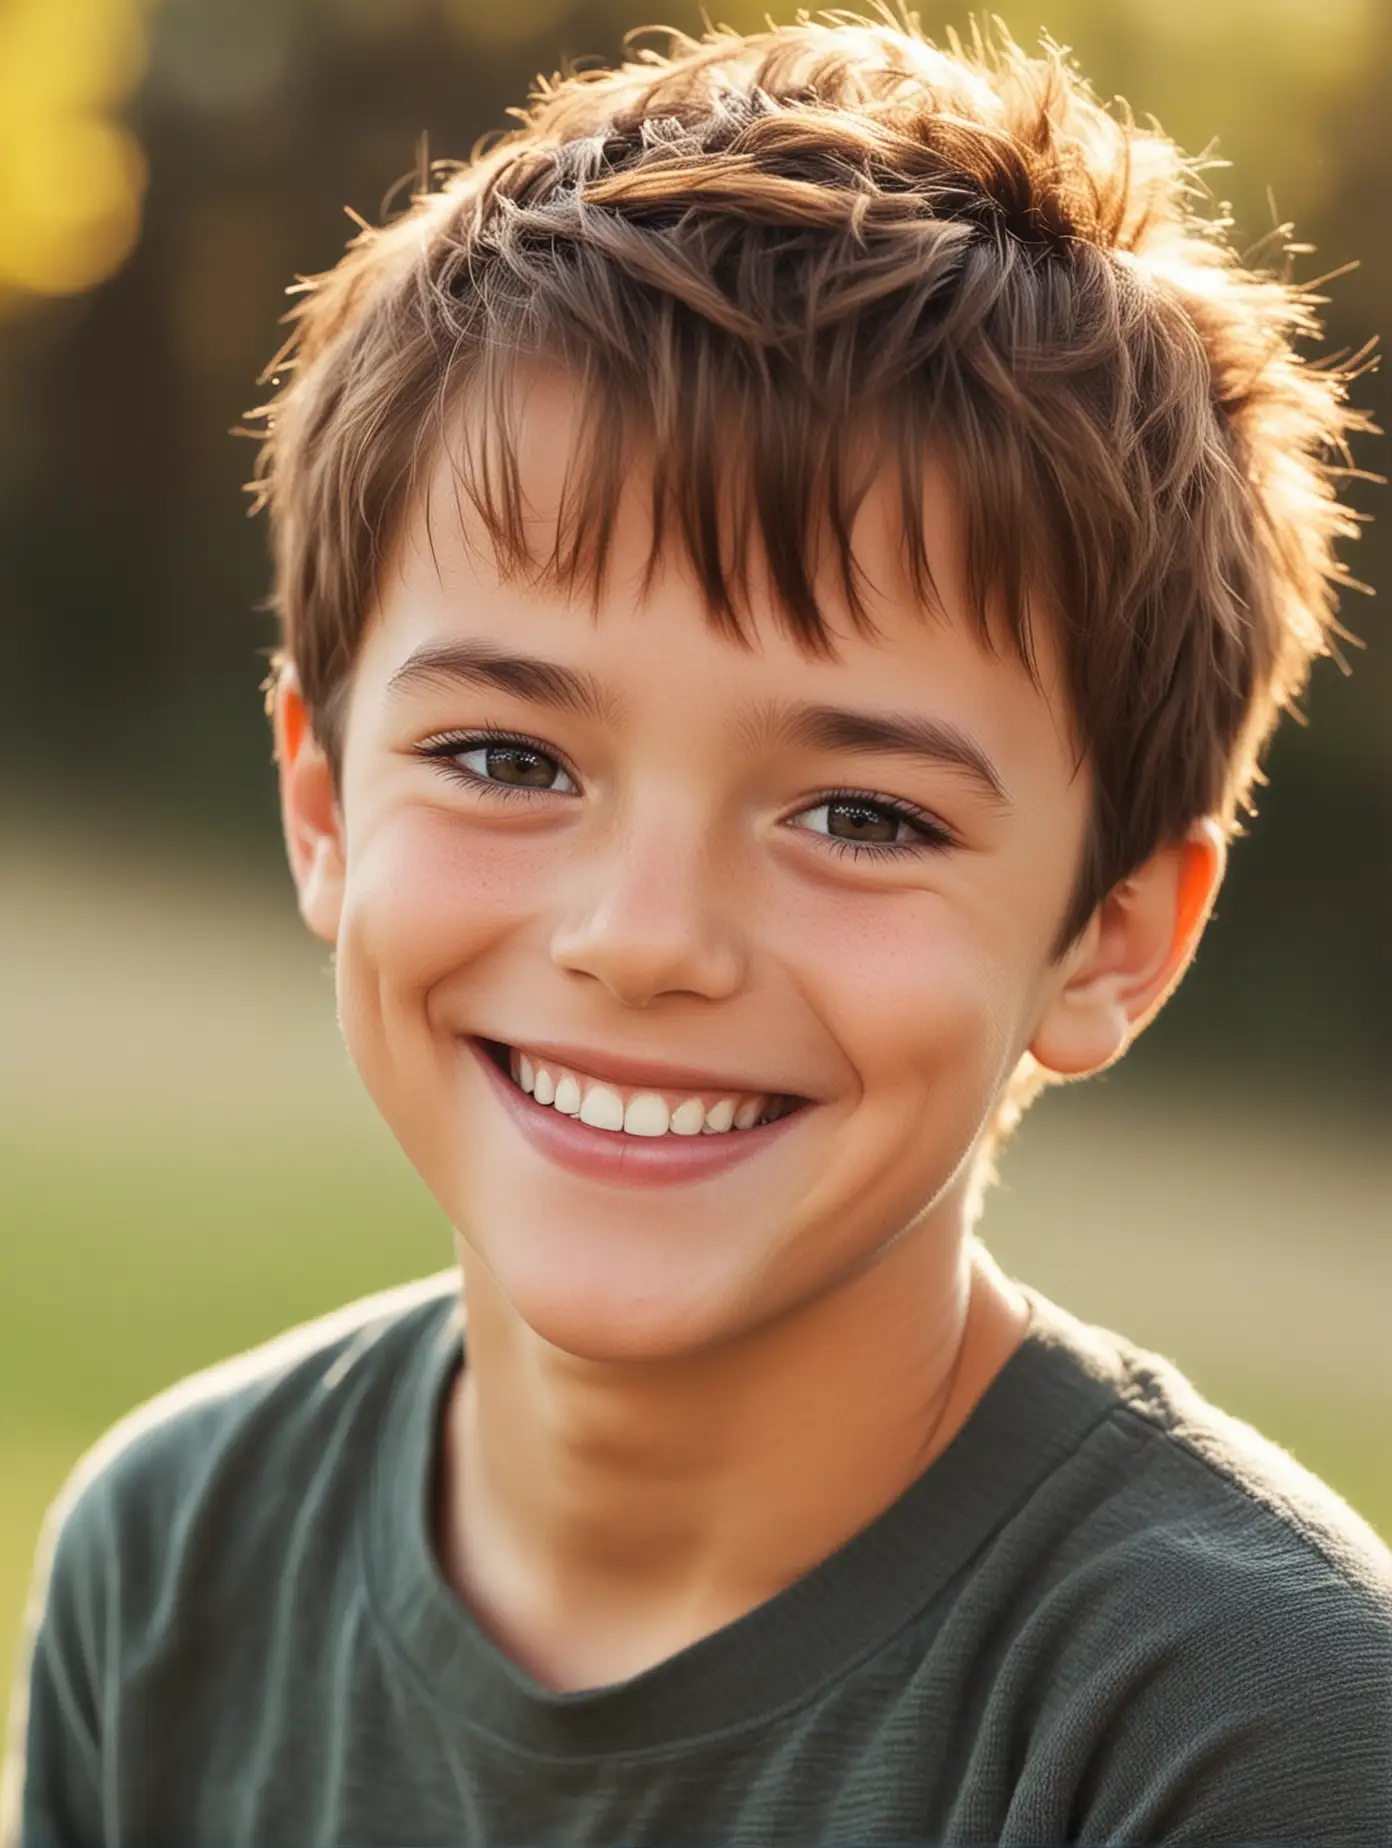 Cheerful Young Boy with a Radiant Smile